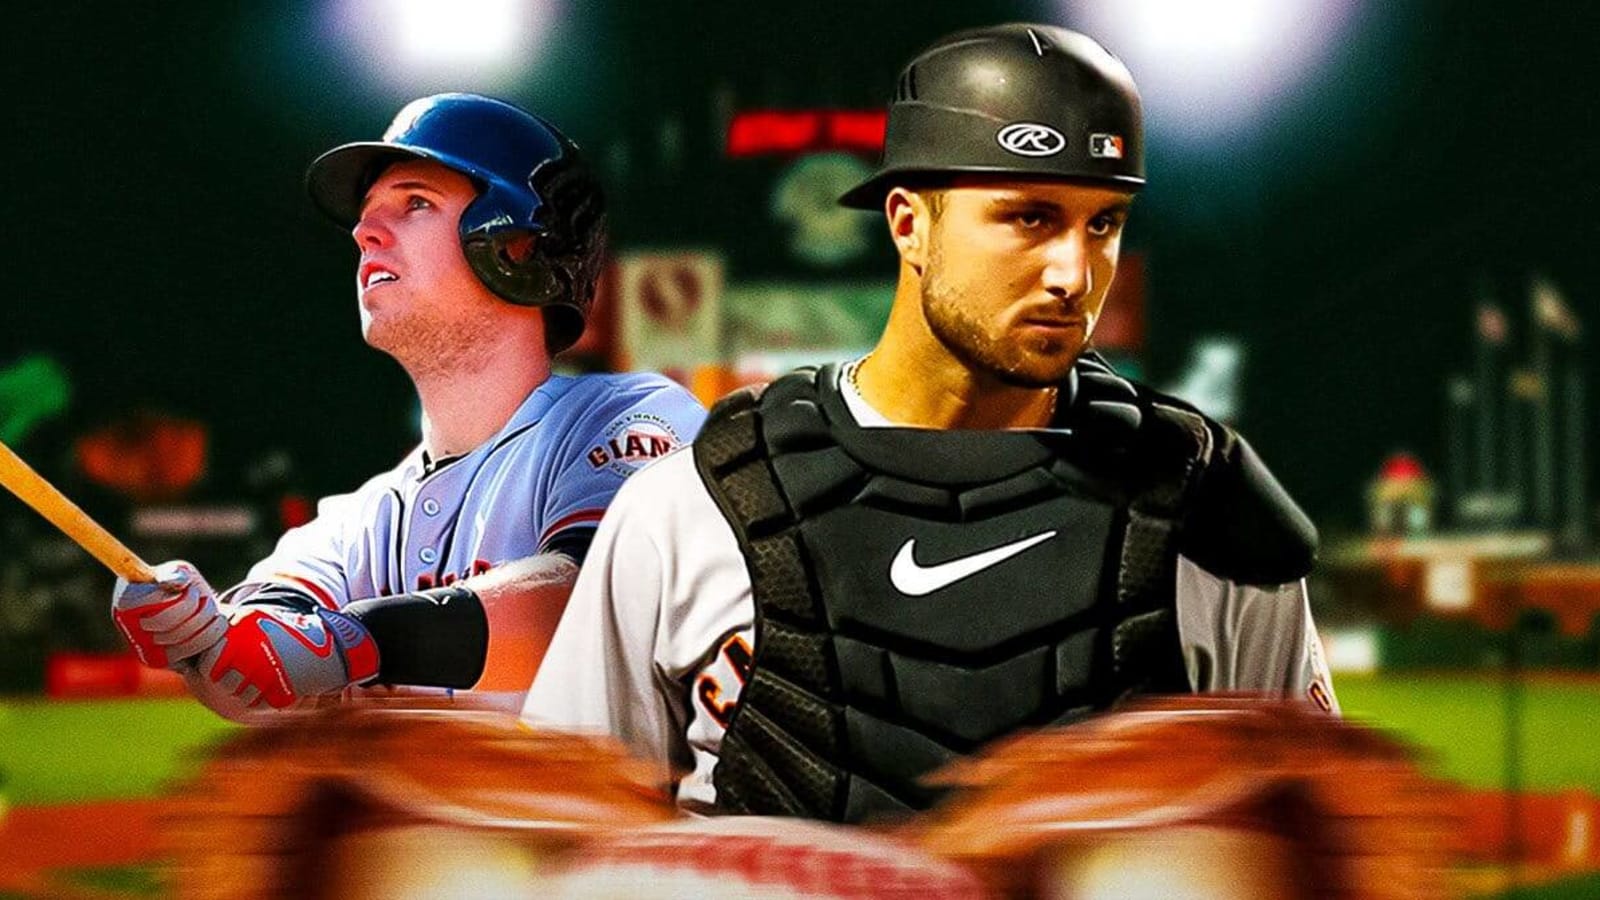 Buster Posey’s Giants replacement Joey Bart’s continued struggles lead to shocking roster move